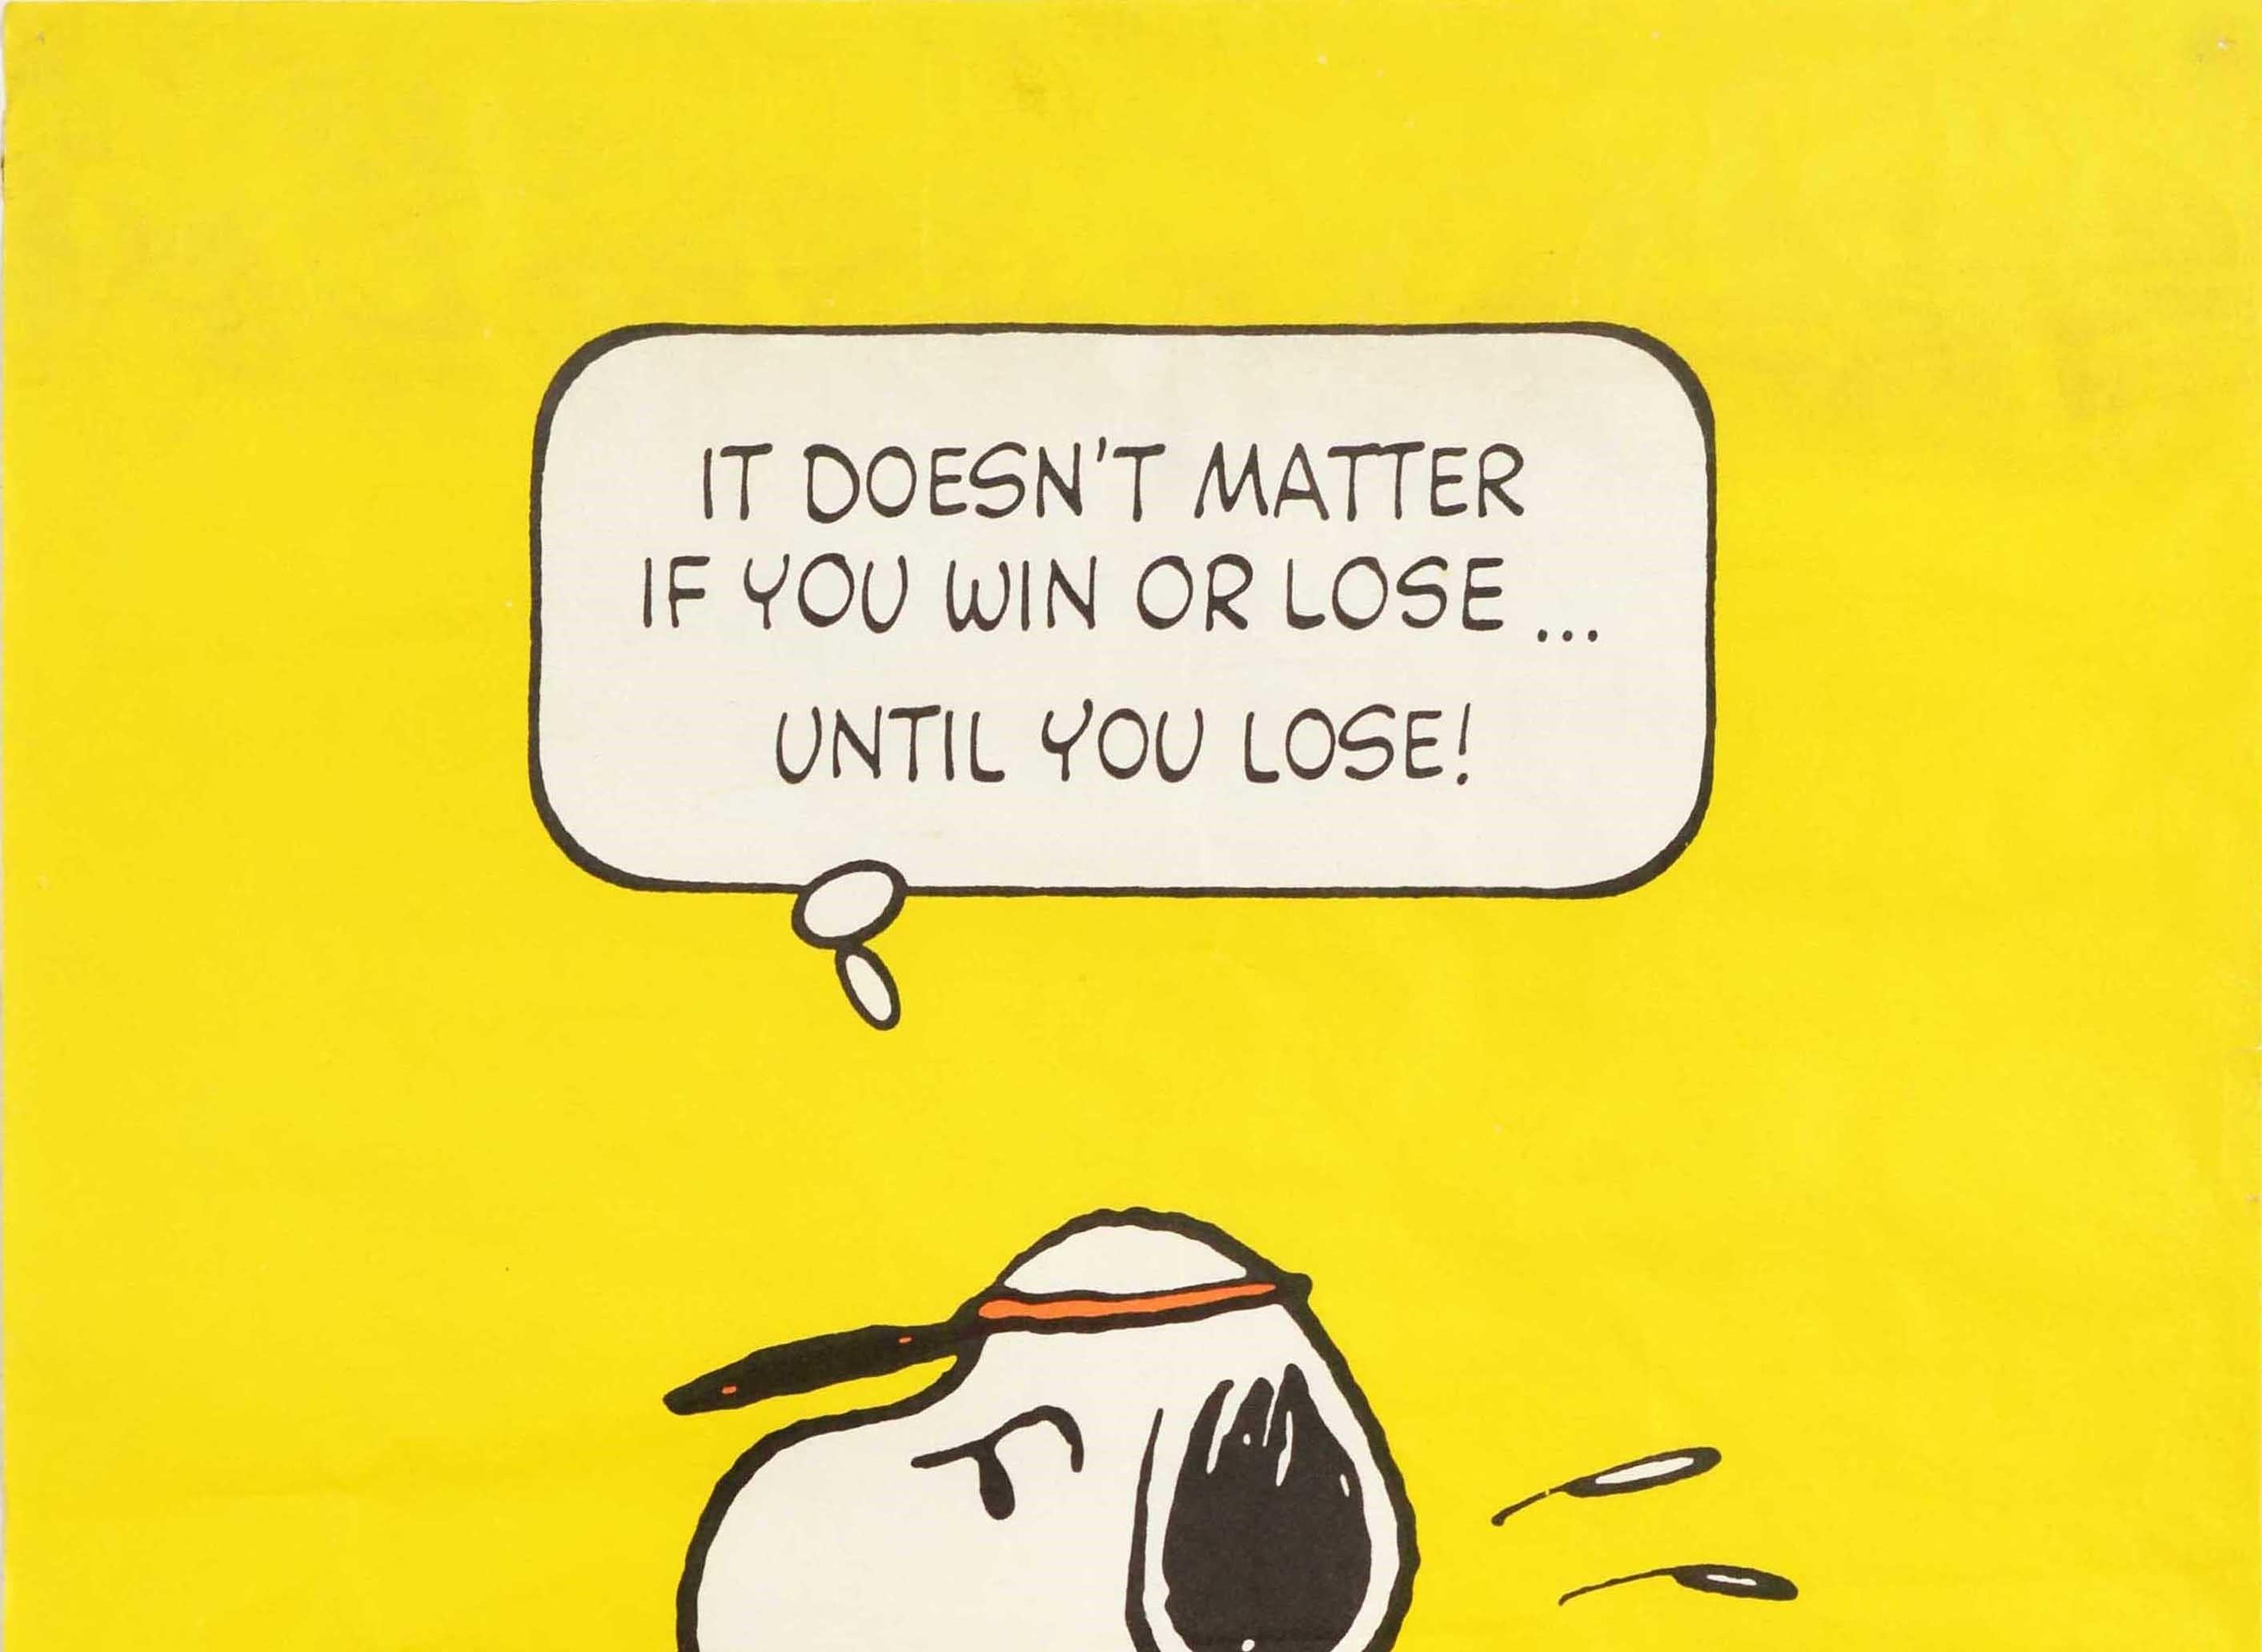 American Original Vintage Snoopy Tennis Poster - It Doesn't Matter If You Win Or Lose...